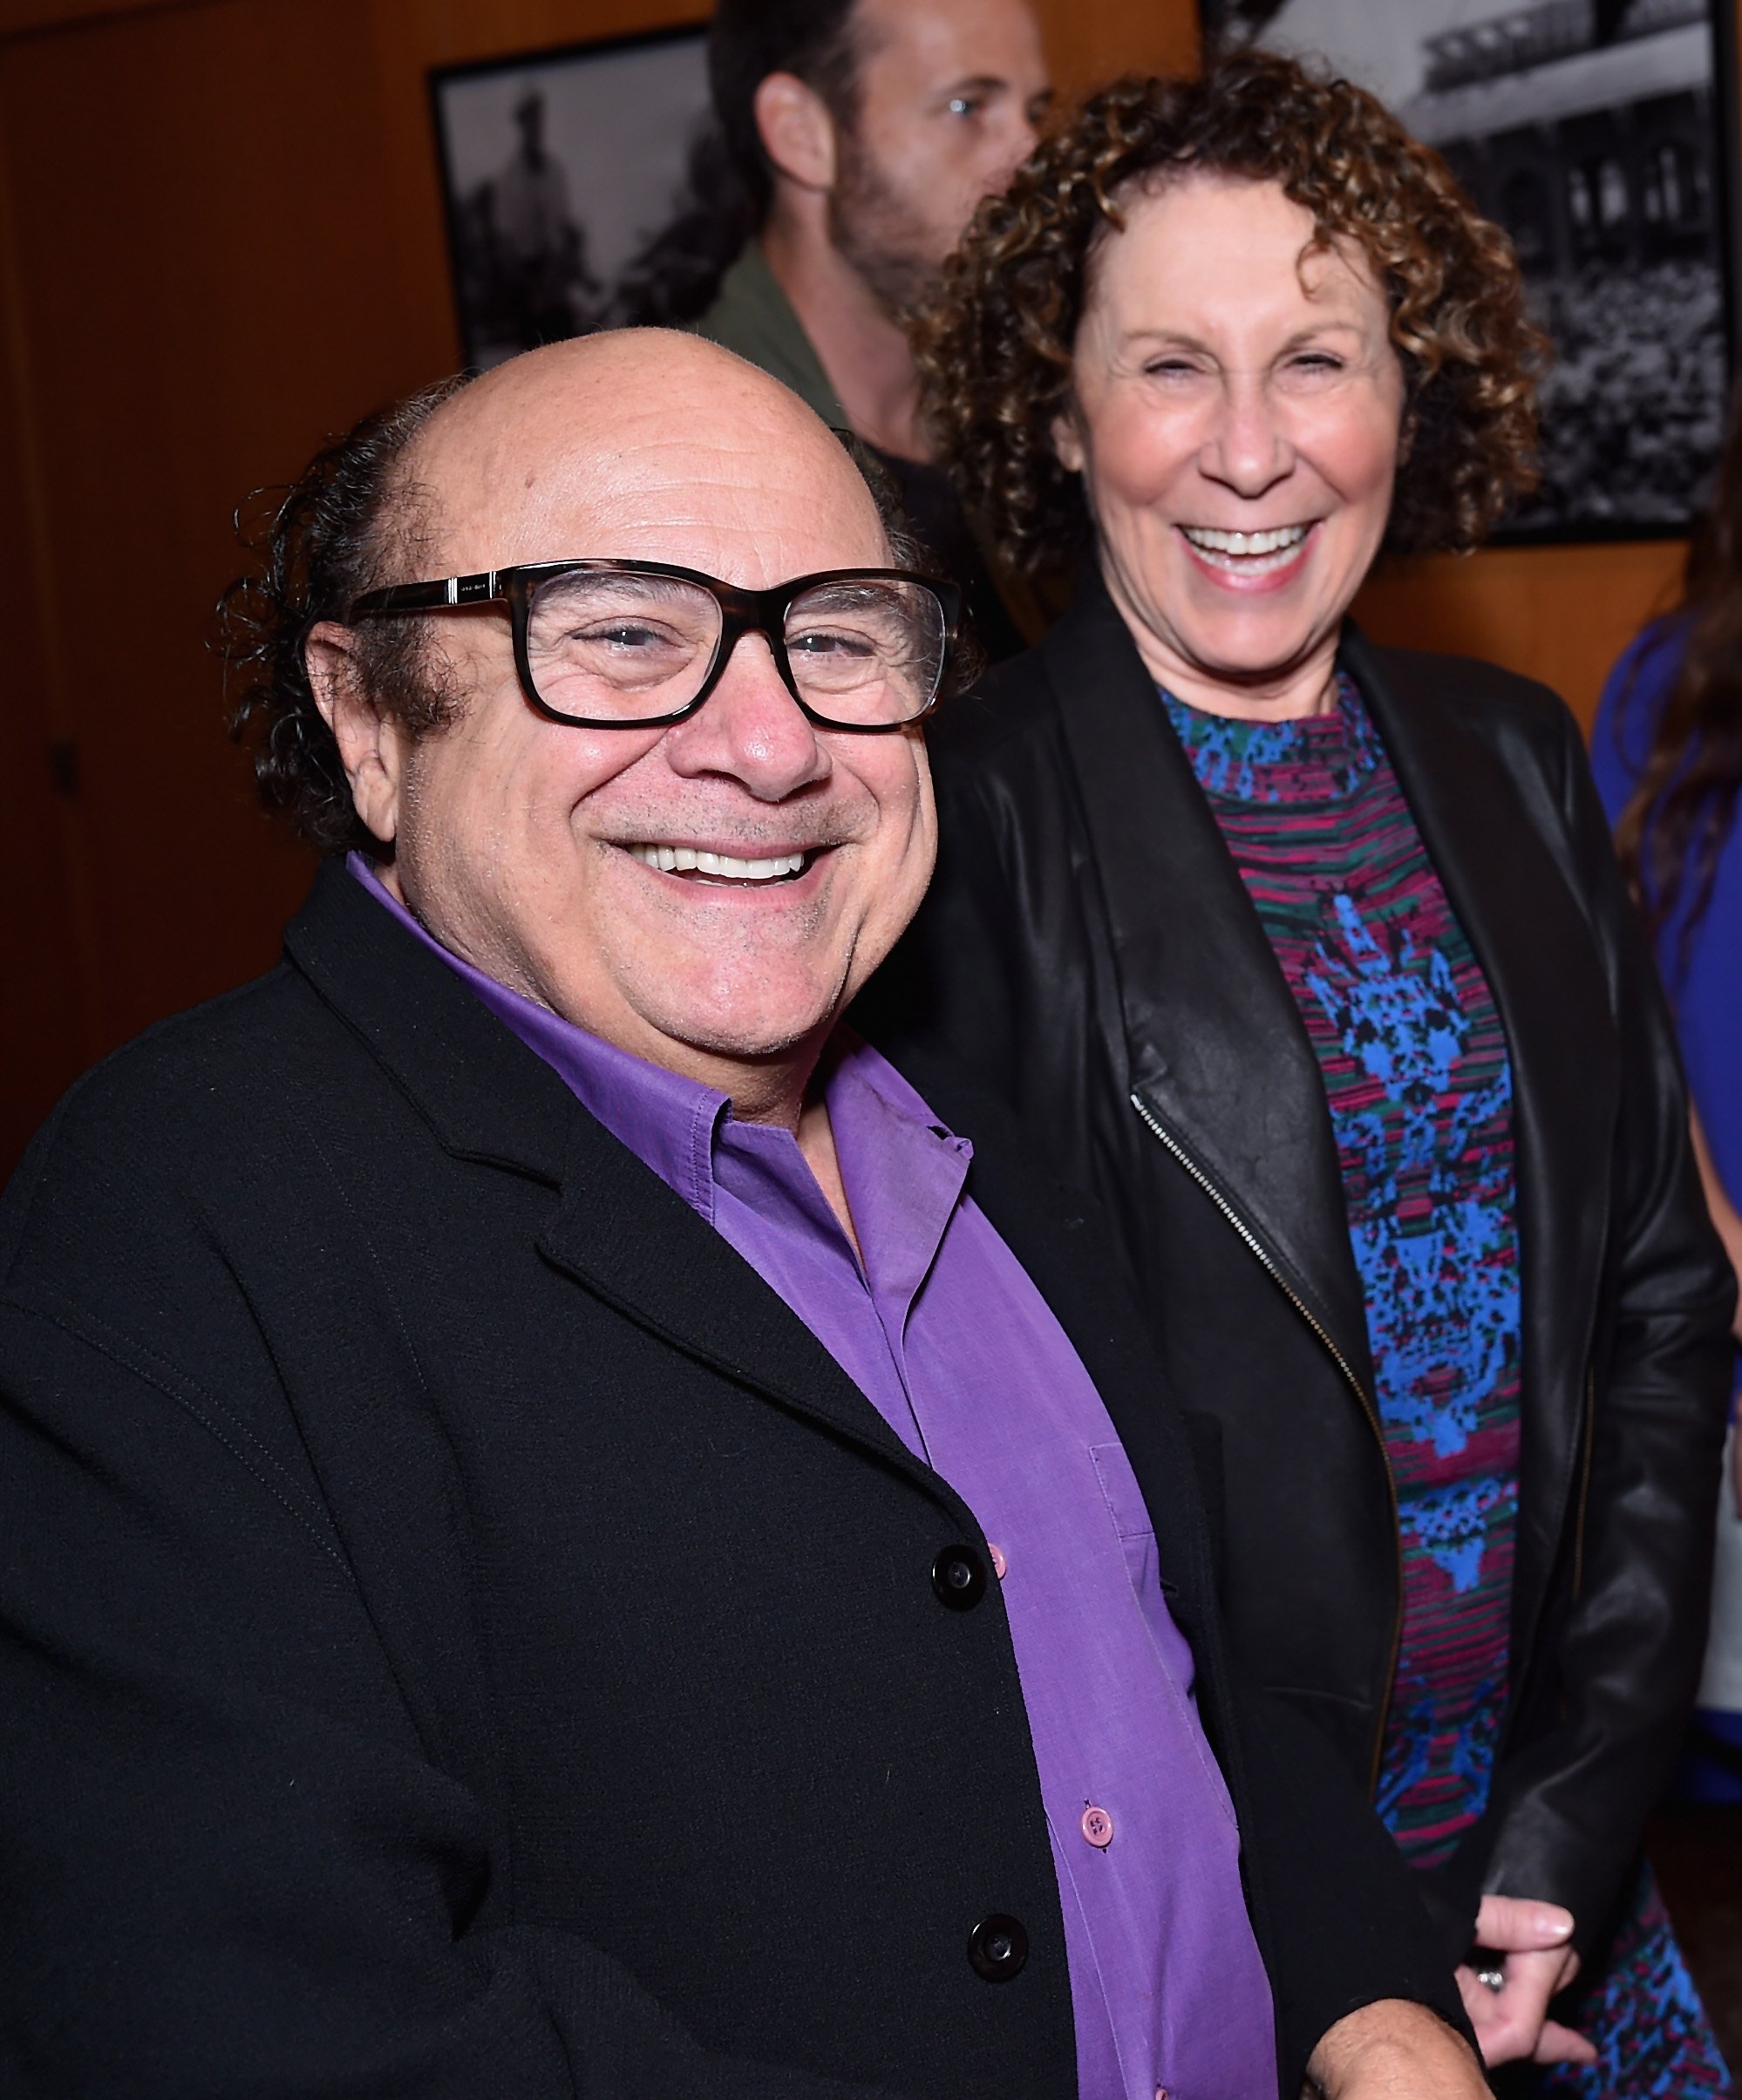 Danny DeVito and Rhea Pearlman attend the premiere of "The Better Angels" at DGA Theater on October 27, 2014 in Los Angeles, California. Photo: Getty Images